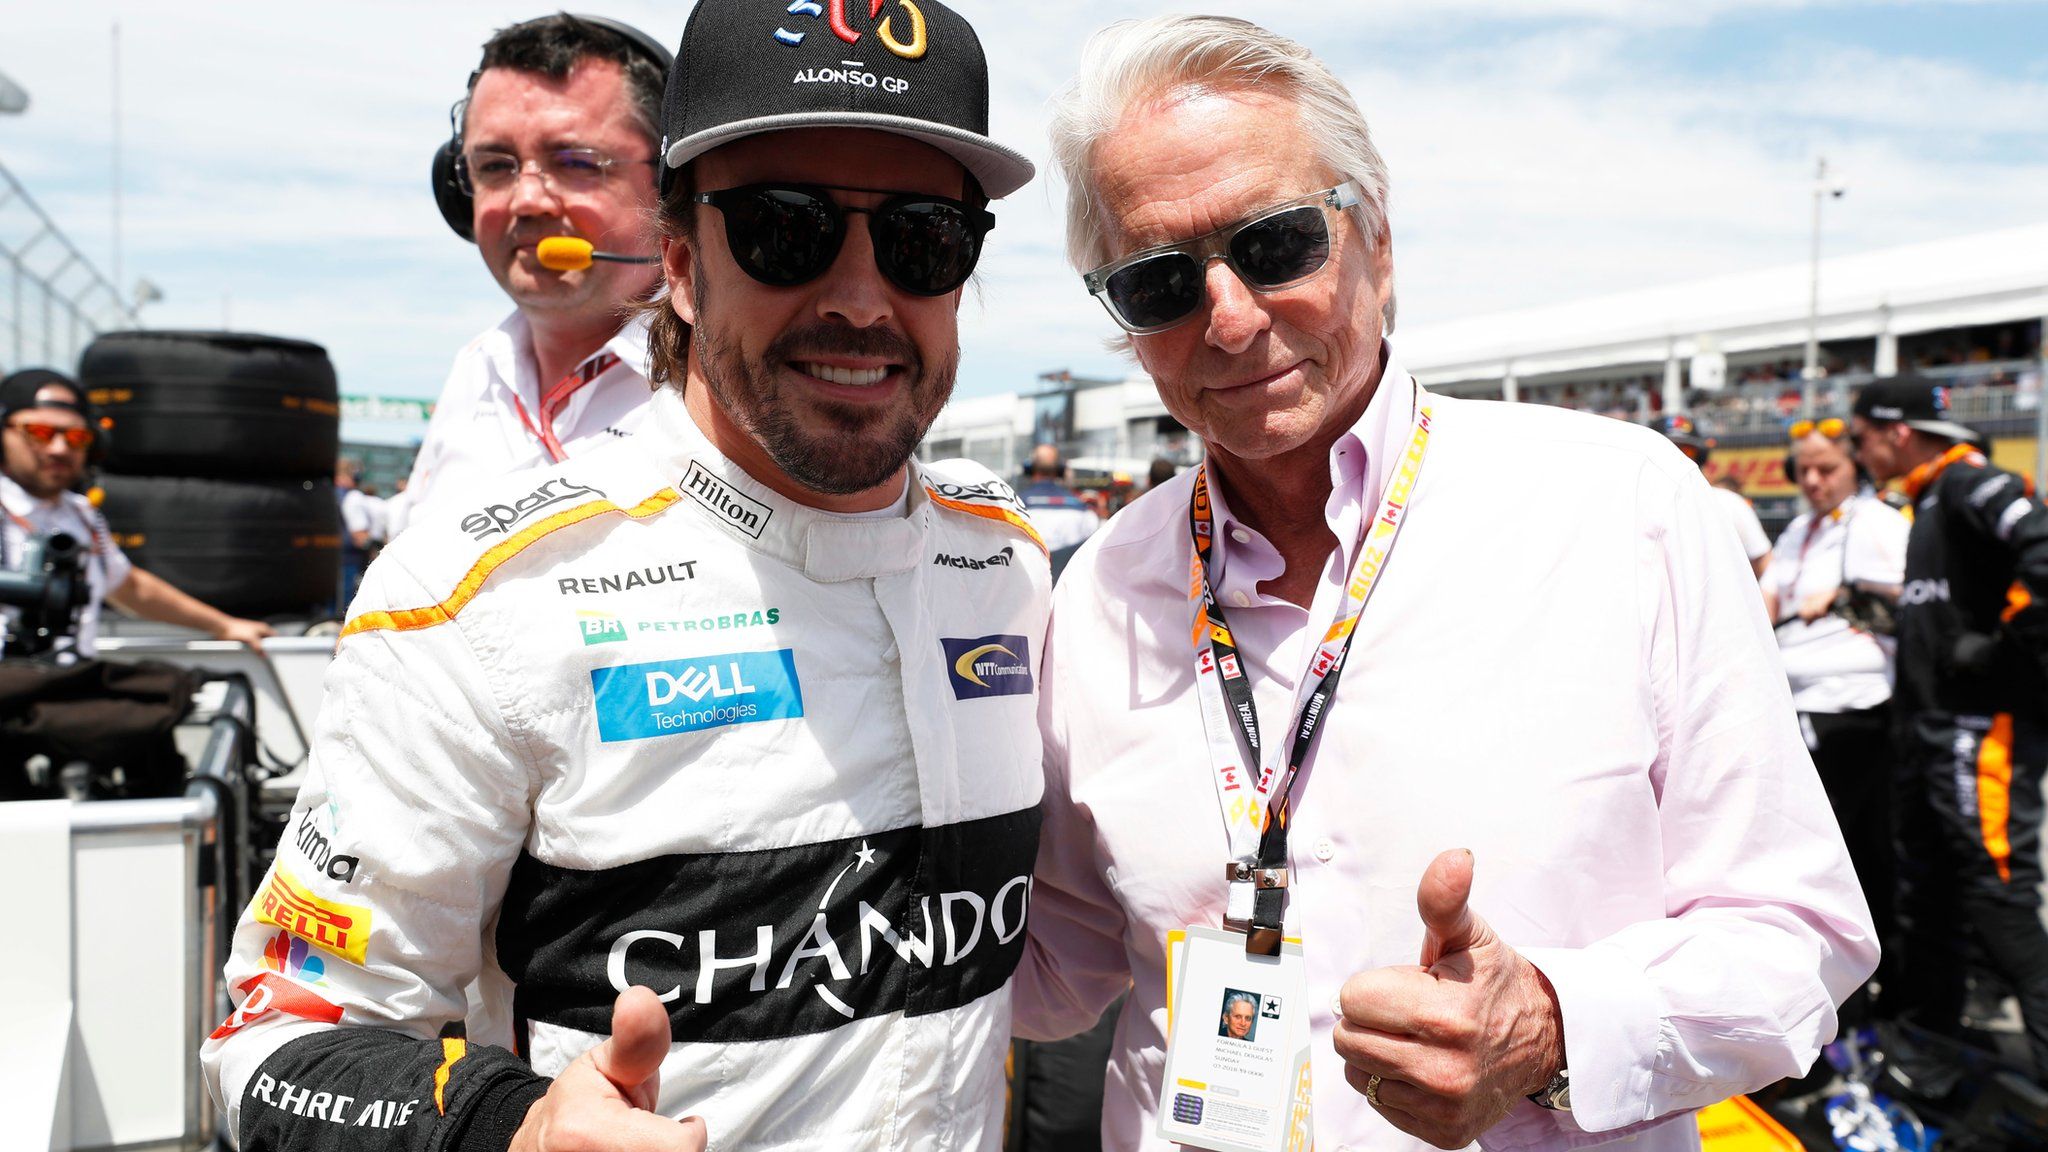 McLaren F1 driver Fernando Alonso with actor Michael Douglas on the grid during the Canadian GP